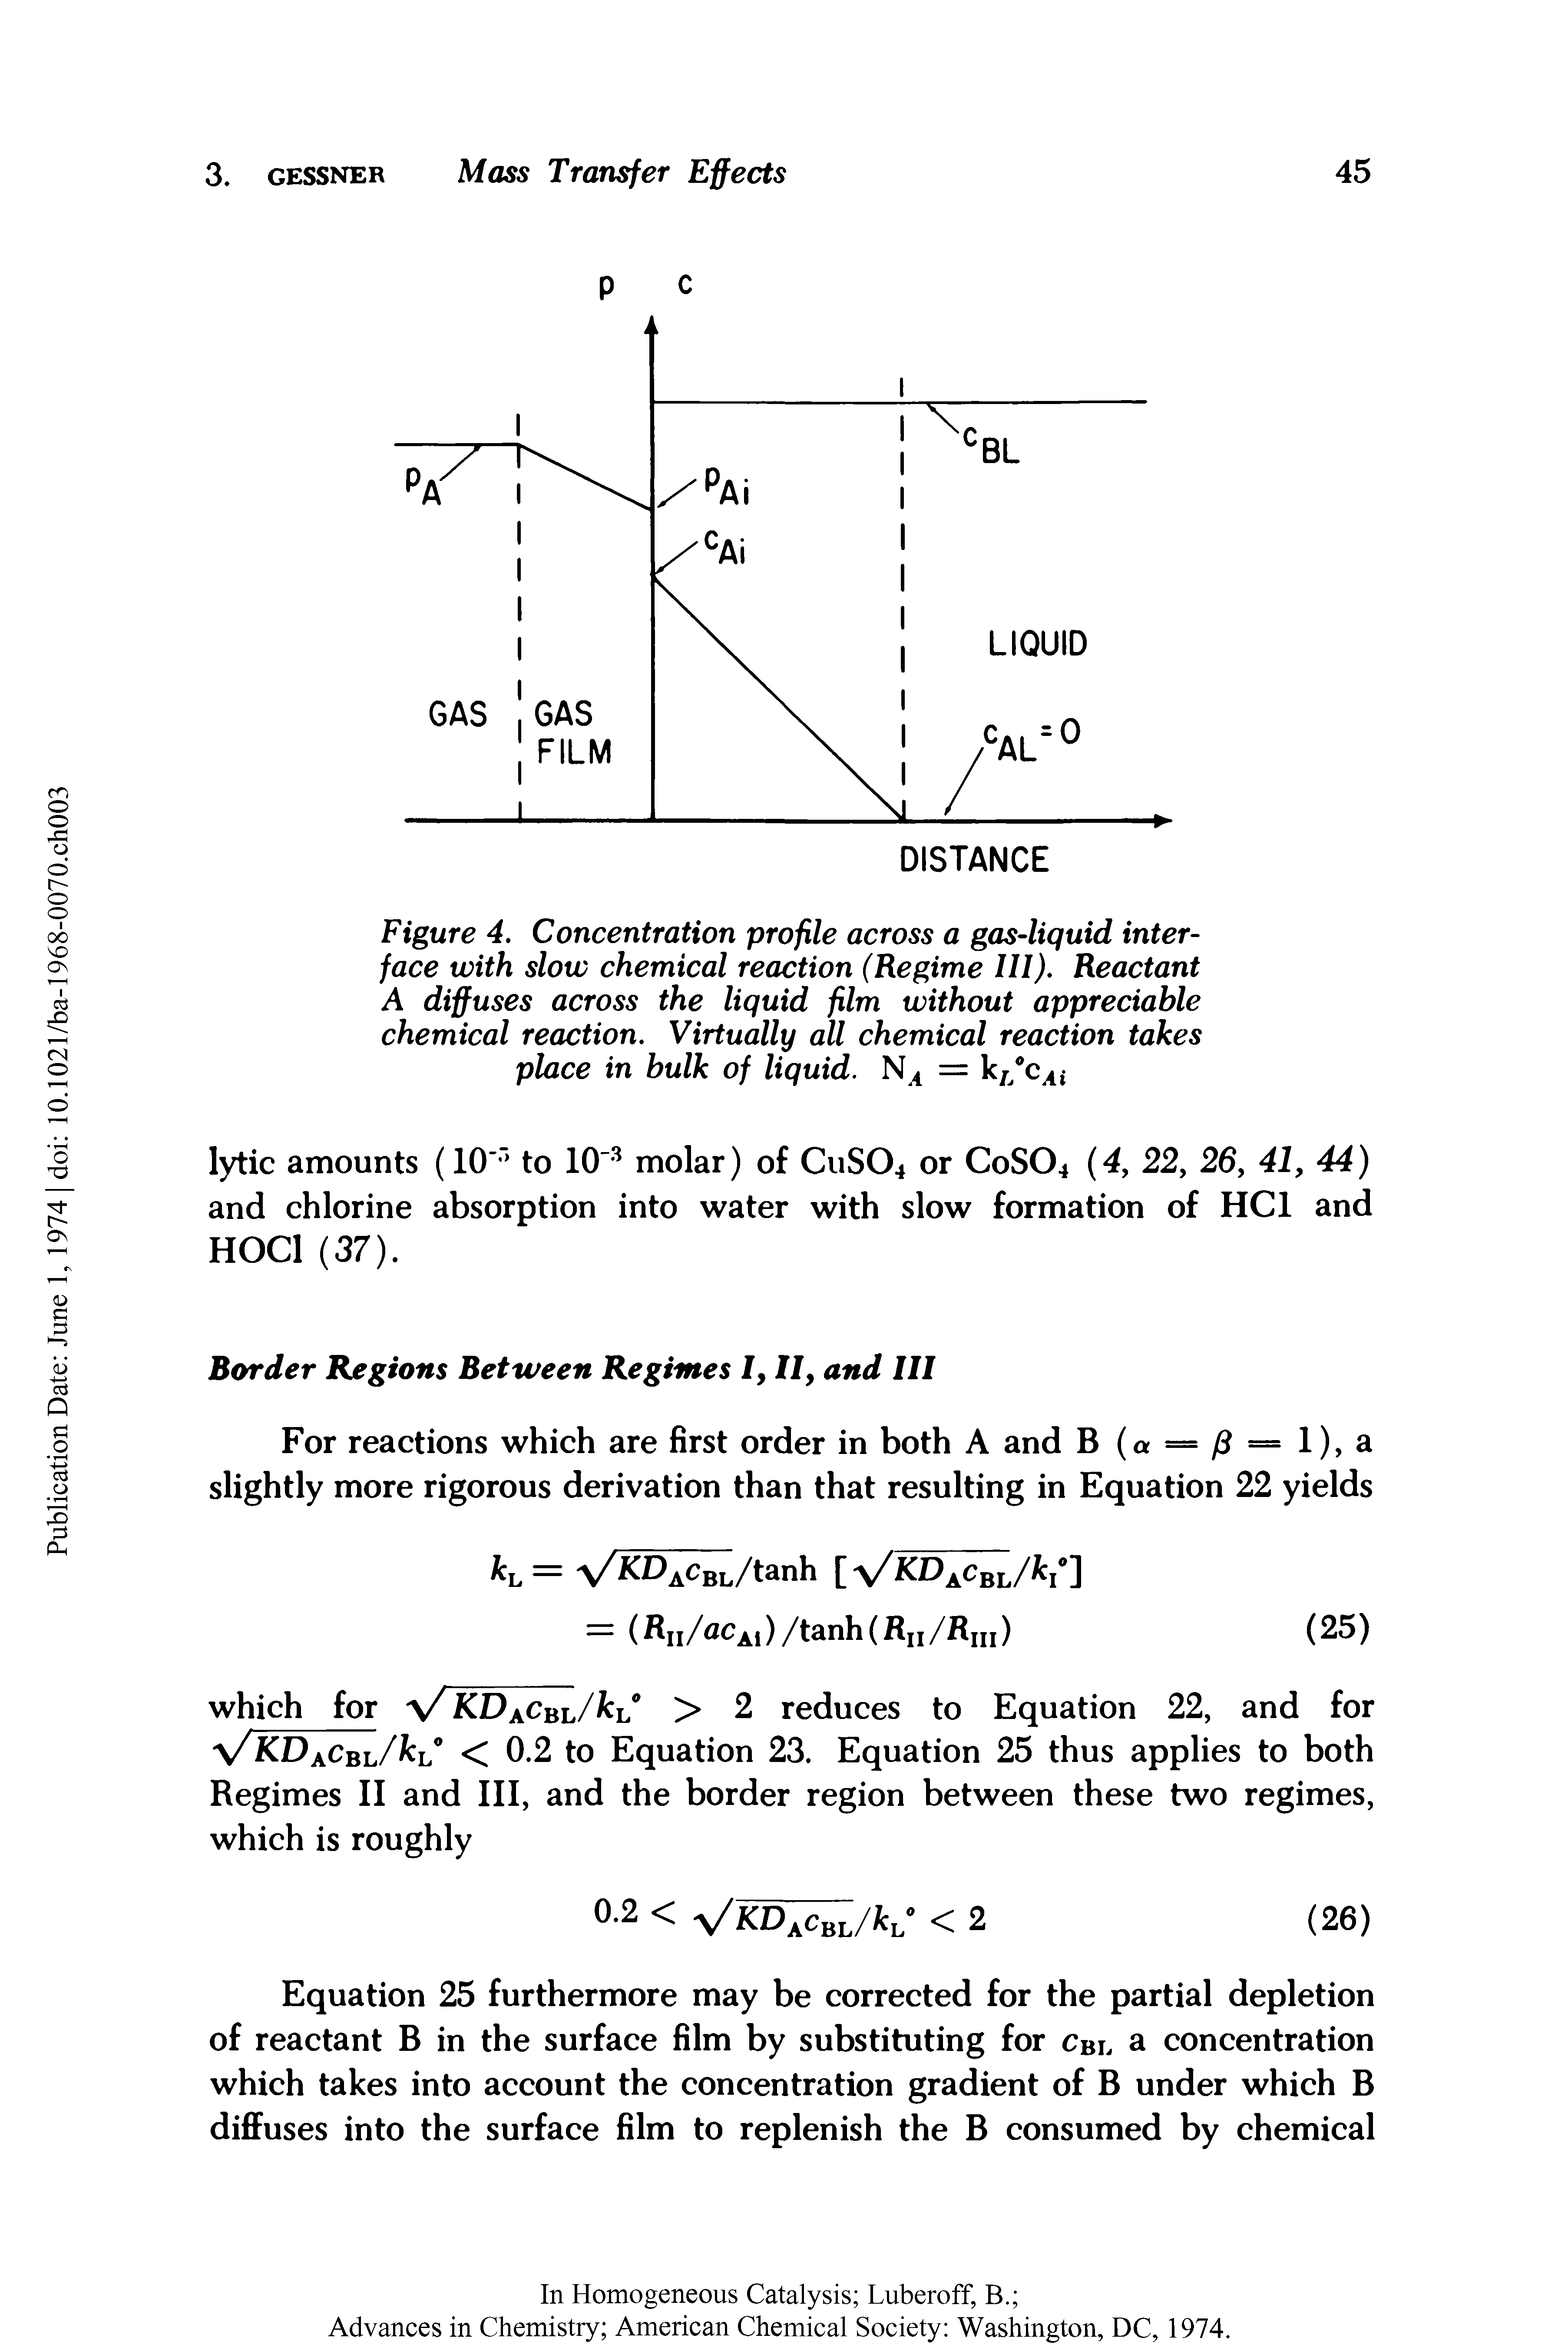 Figure 4. Concentration profile across a gas-liquid interface with slow chemical reaction (Regime III), Reactant A diffuses across the liquid film without appreciable chemical reaction. Virtually all chemical reaction takes place in bulk of liquid.